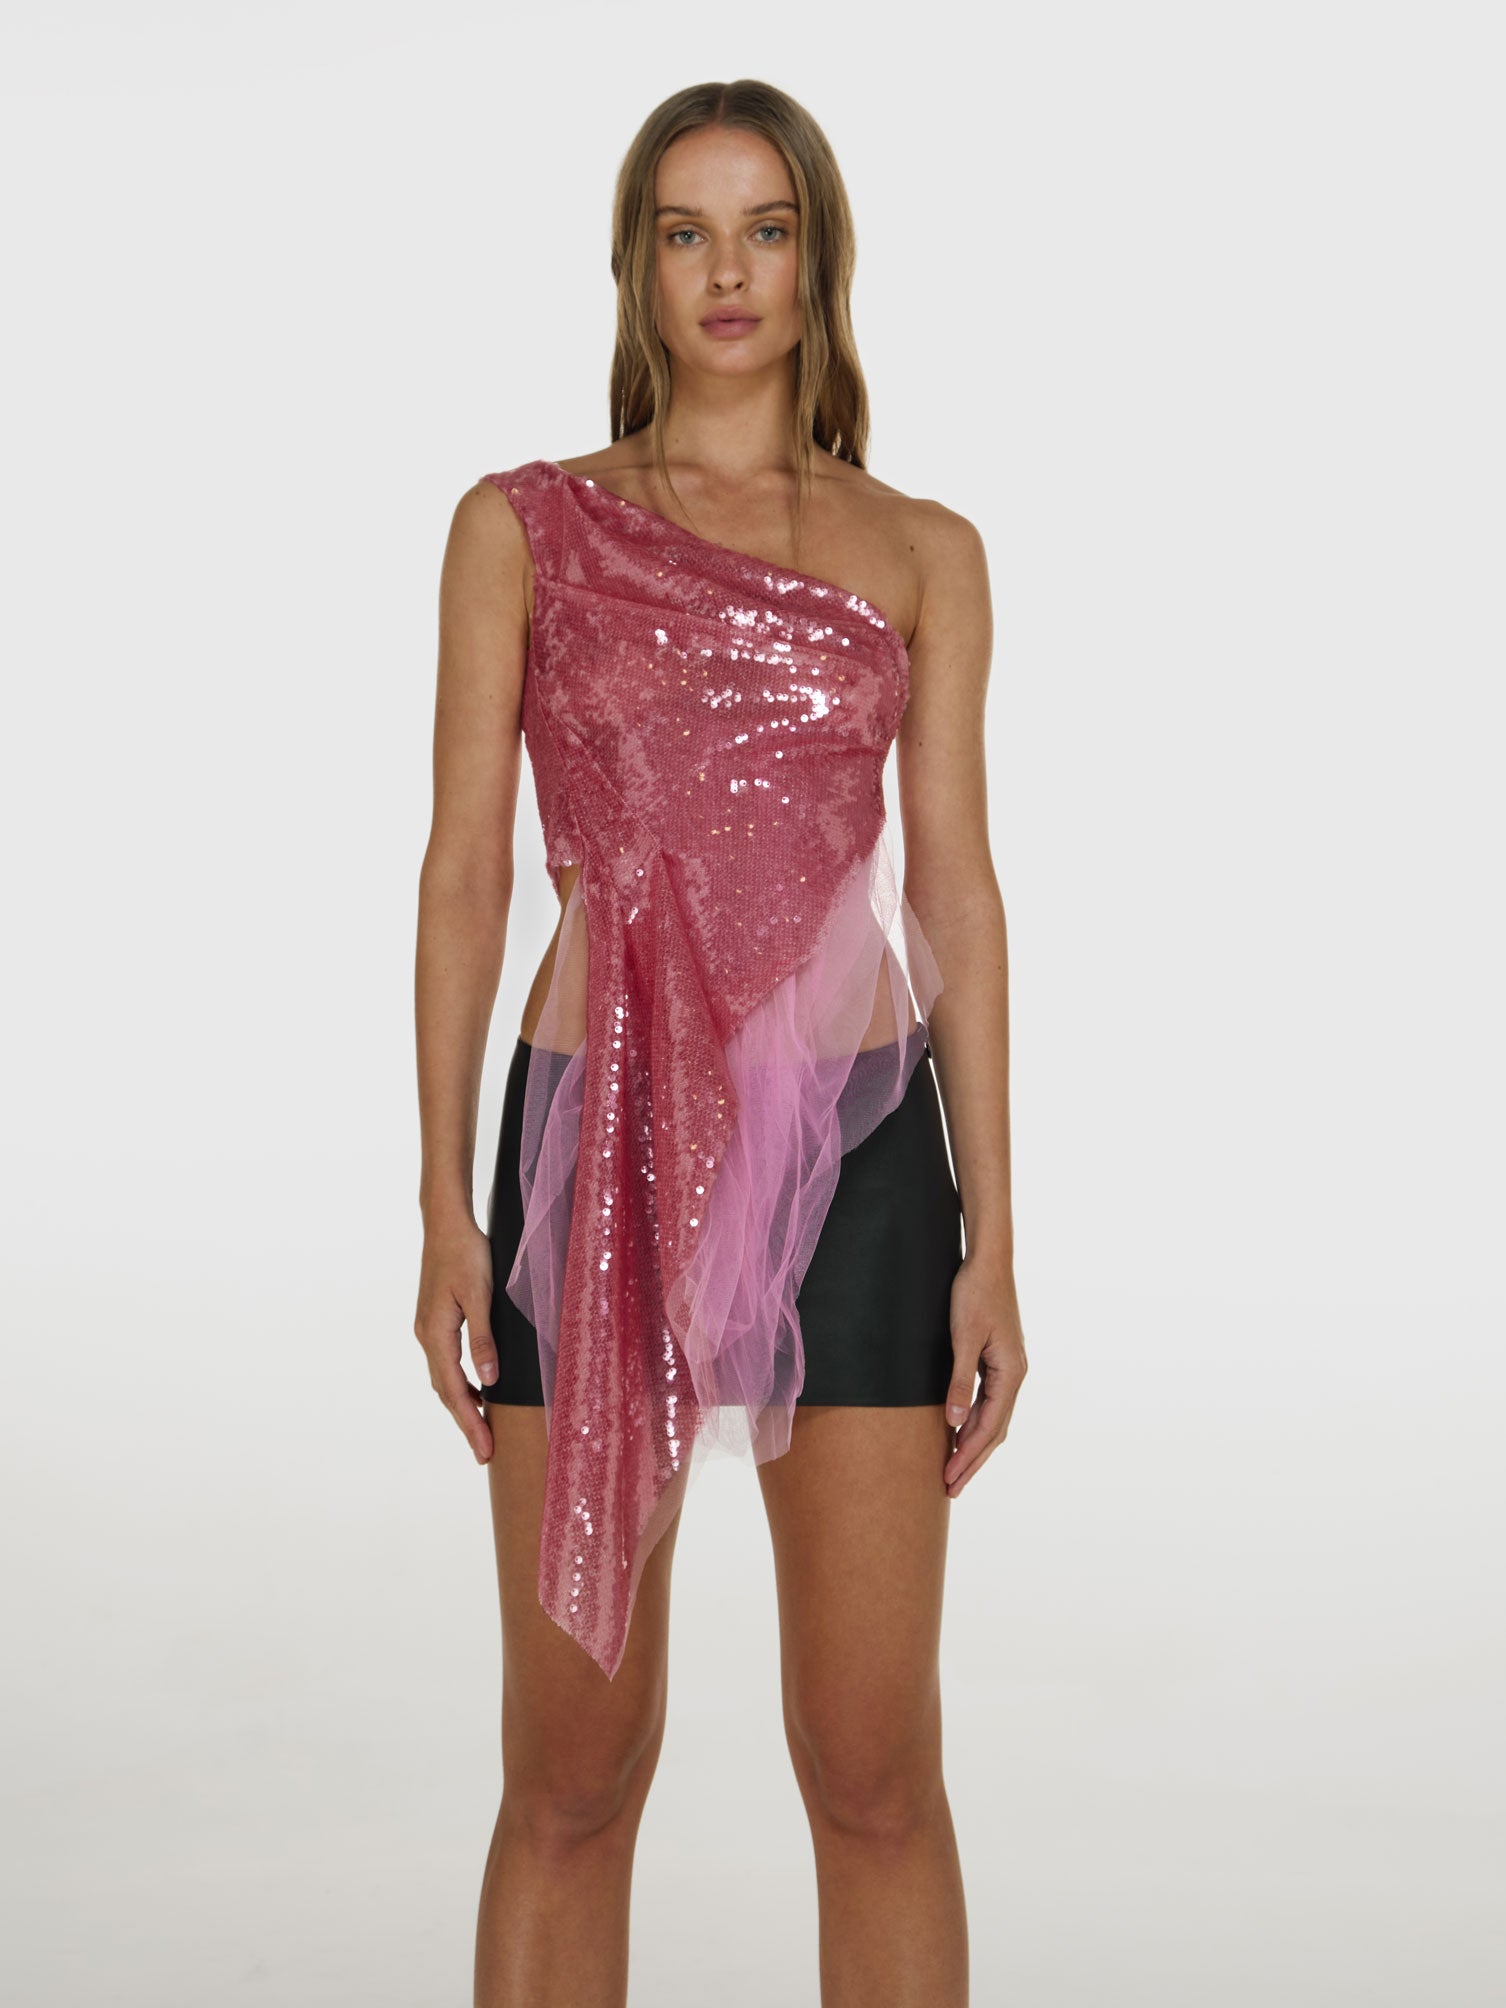 Medium full shot of a girl  in a pink sequinned one shoulder top with asymmetric hem in the front and a black vegan leather low rise mini skort